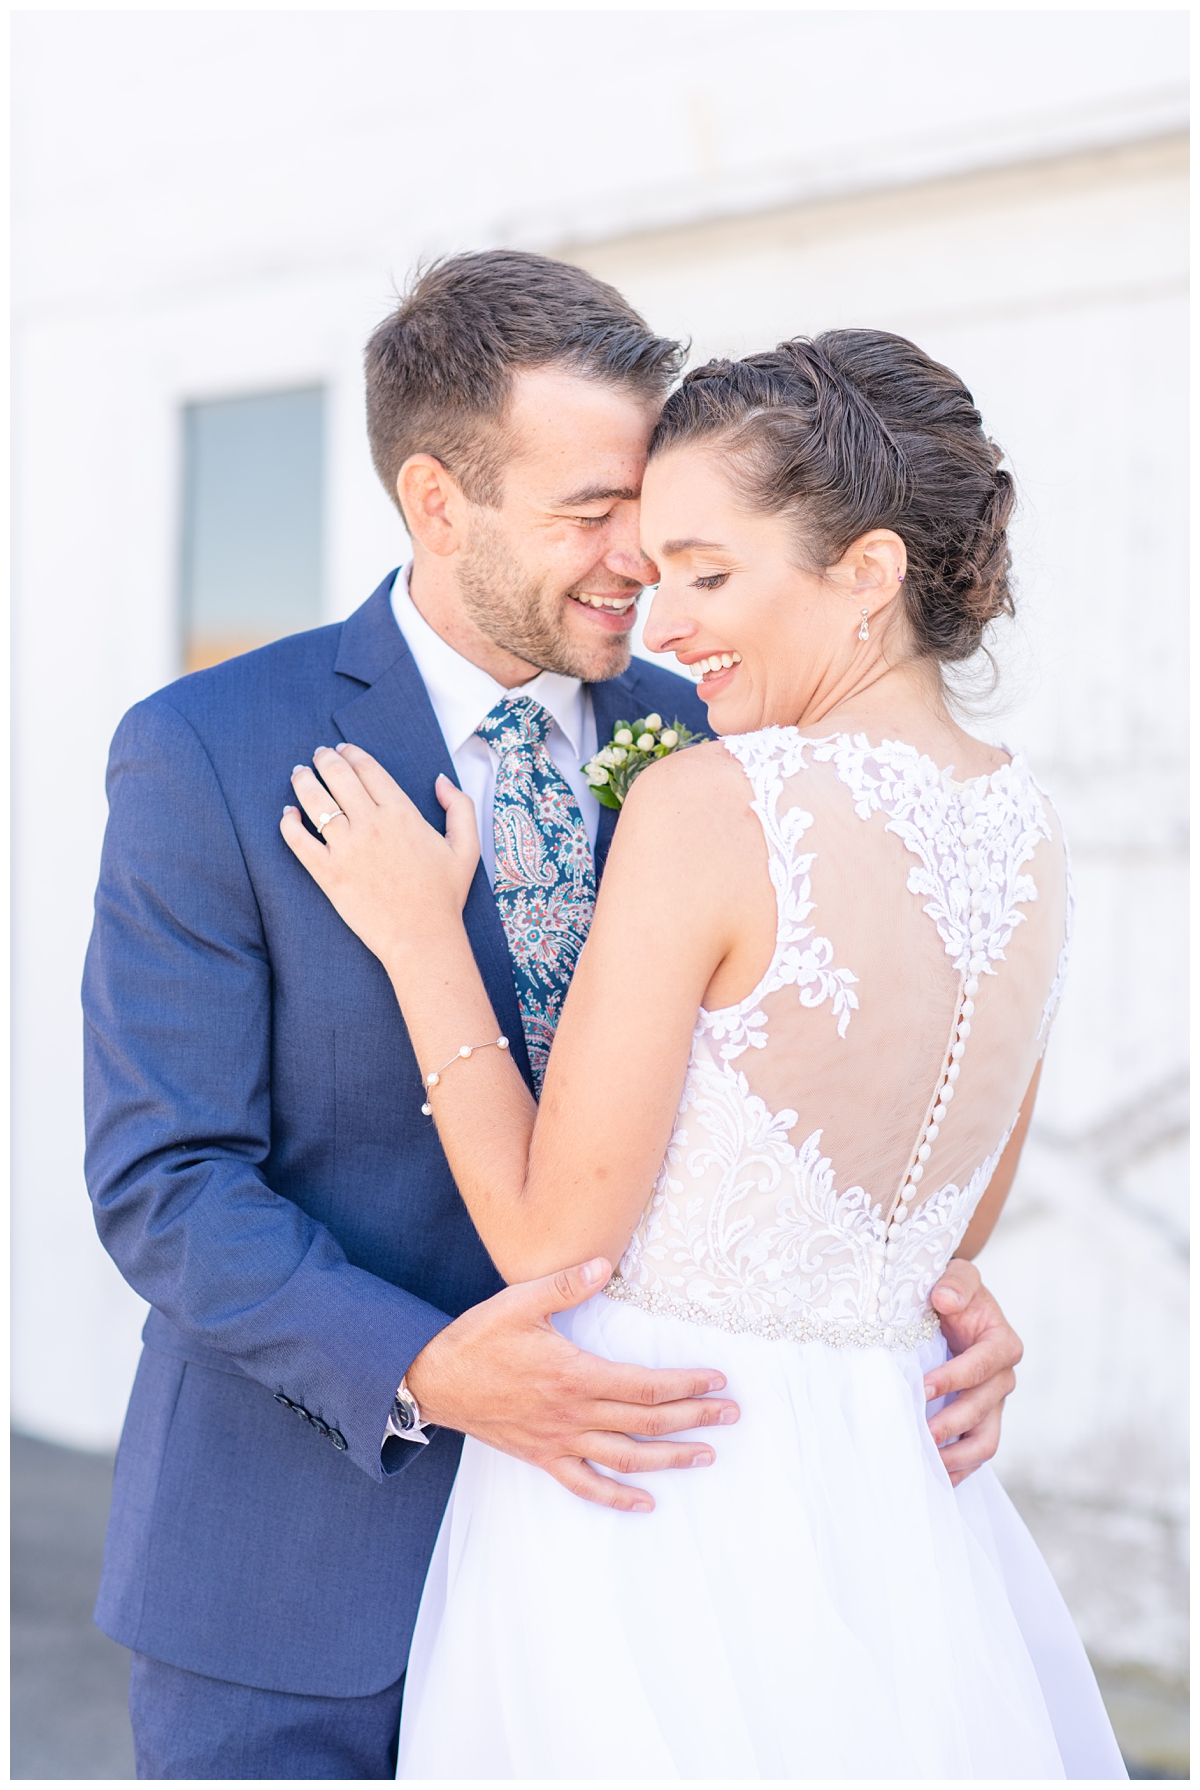 Sophisticated wedding photography in Lancaster, PA